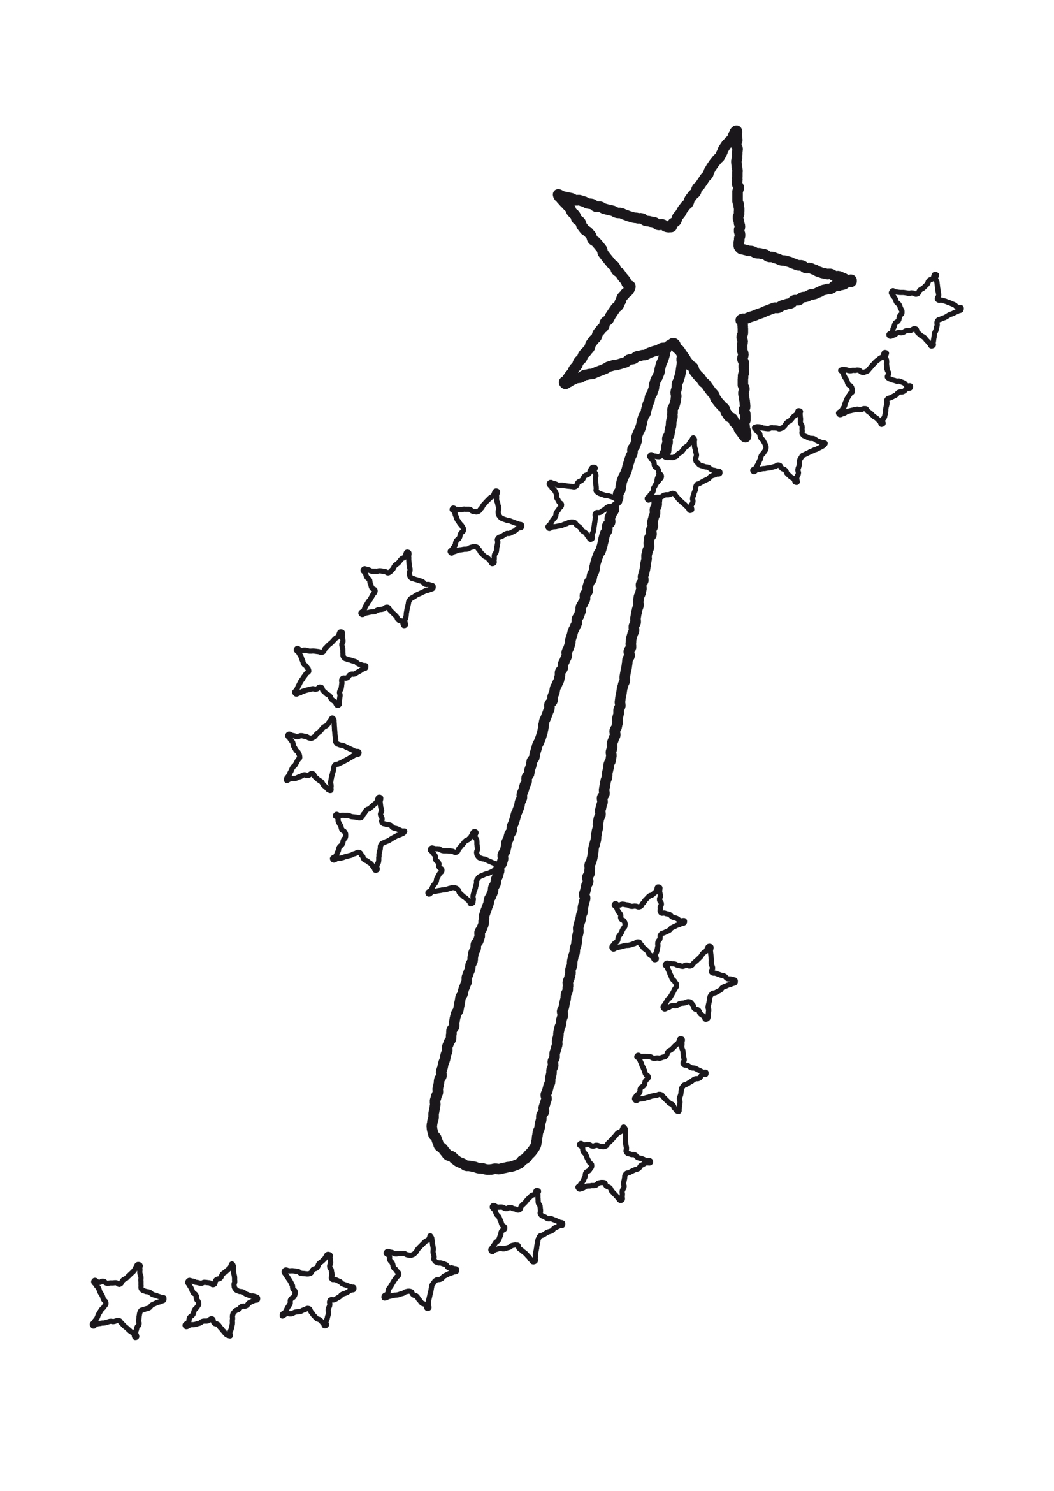 magic-wand-11-coloring-page-free-printable-coloring-pages-for-kids-89b